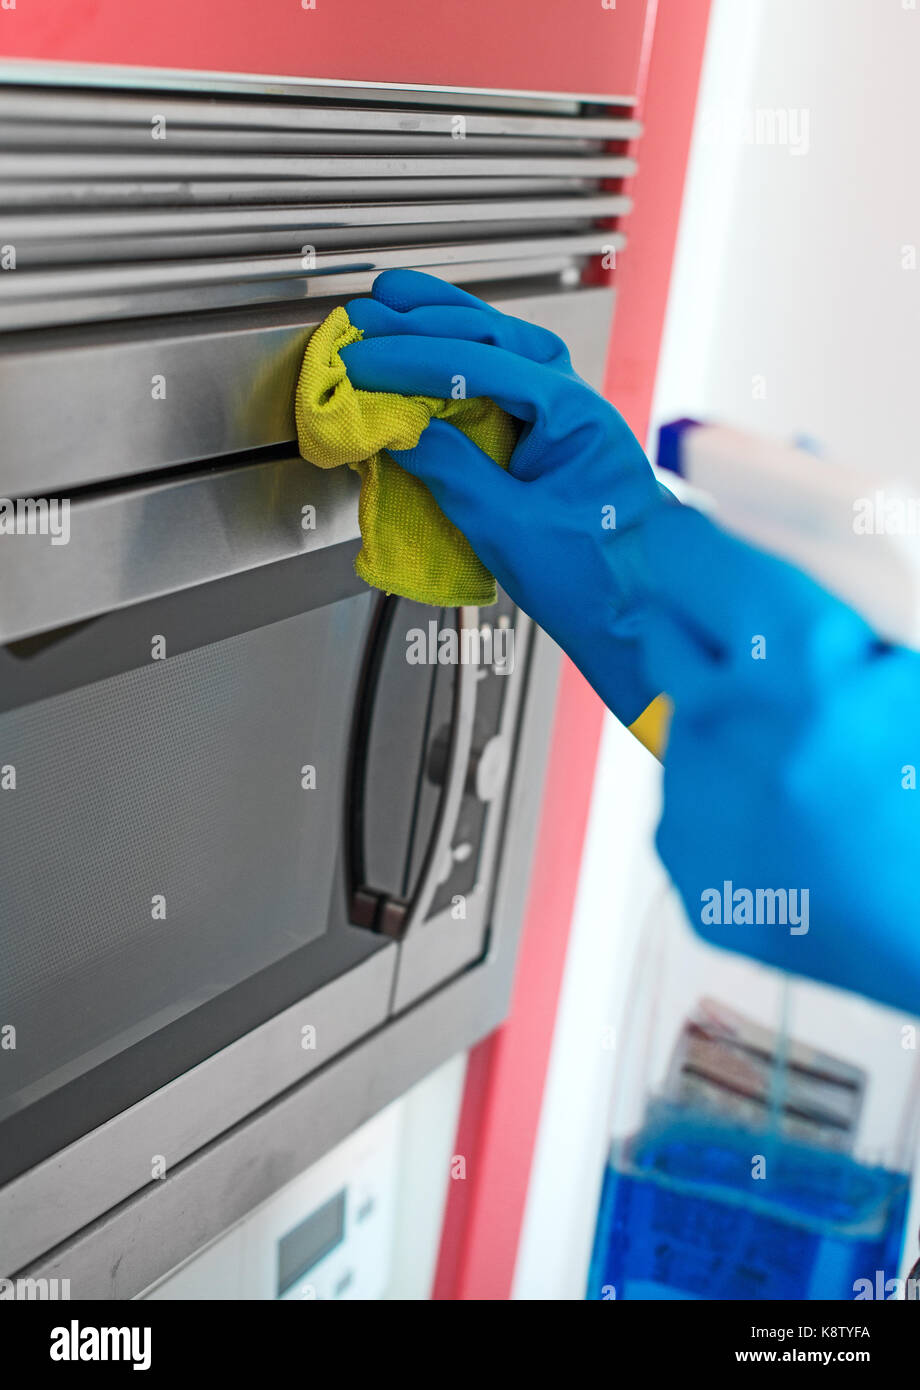 House cleaning. Woman is wiping microwave oven. Stock Photo